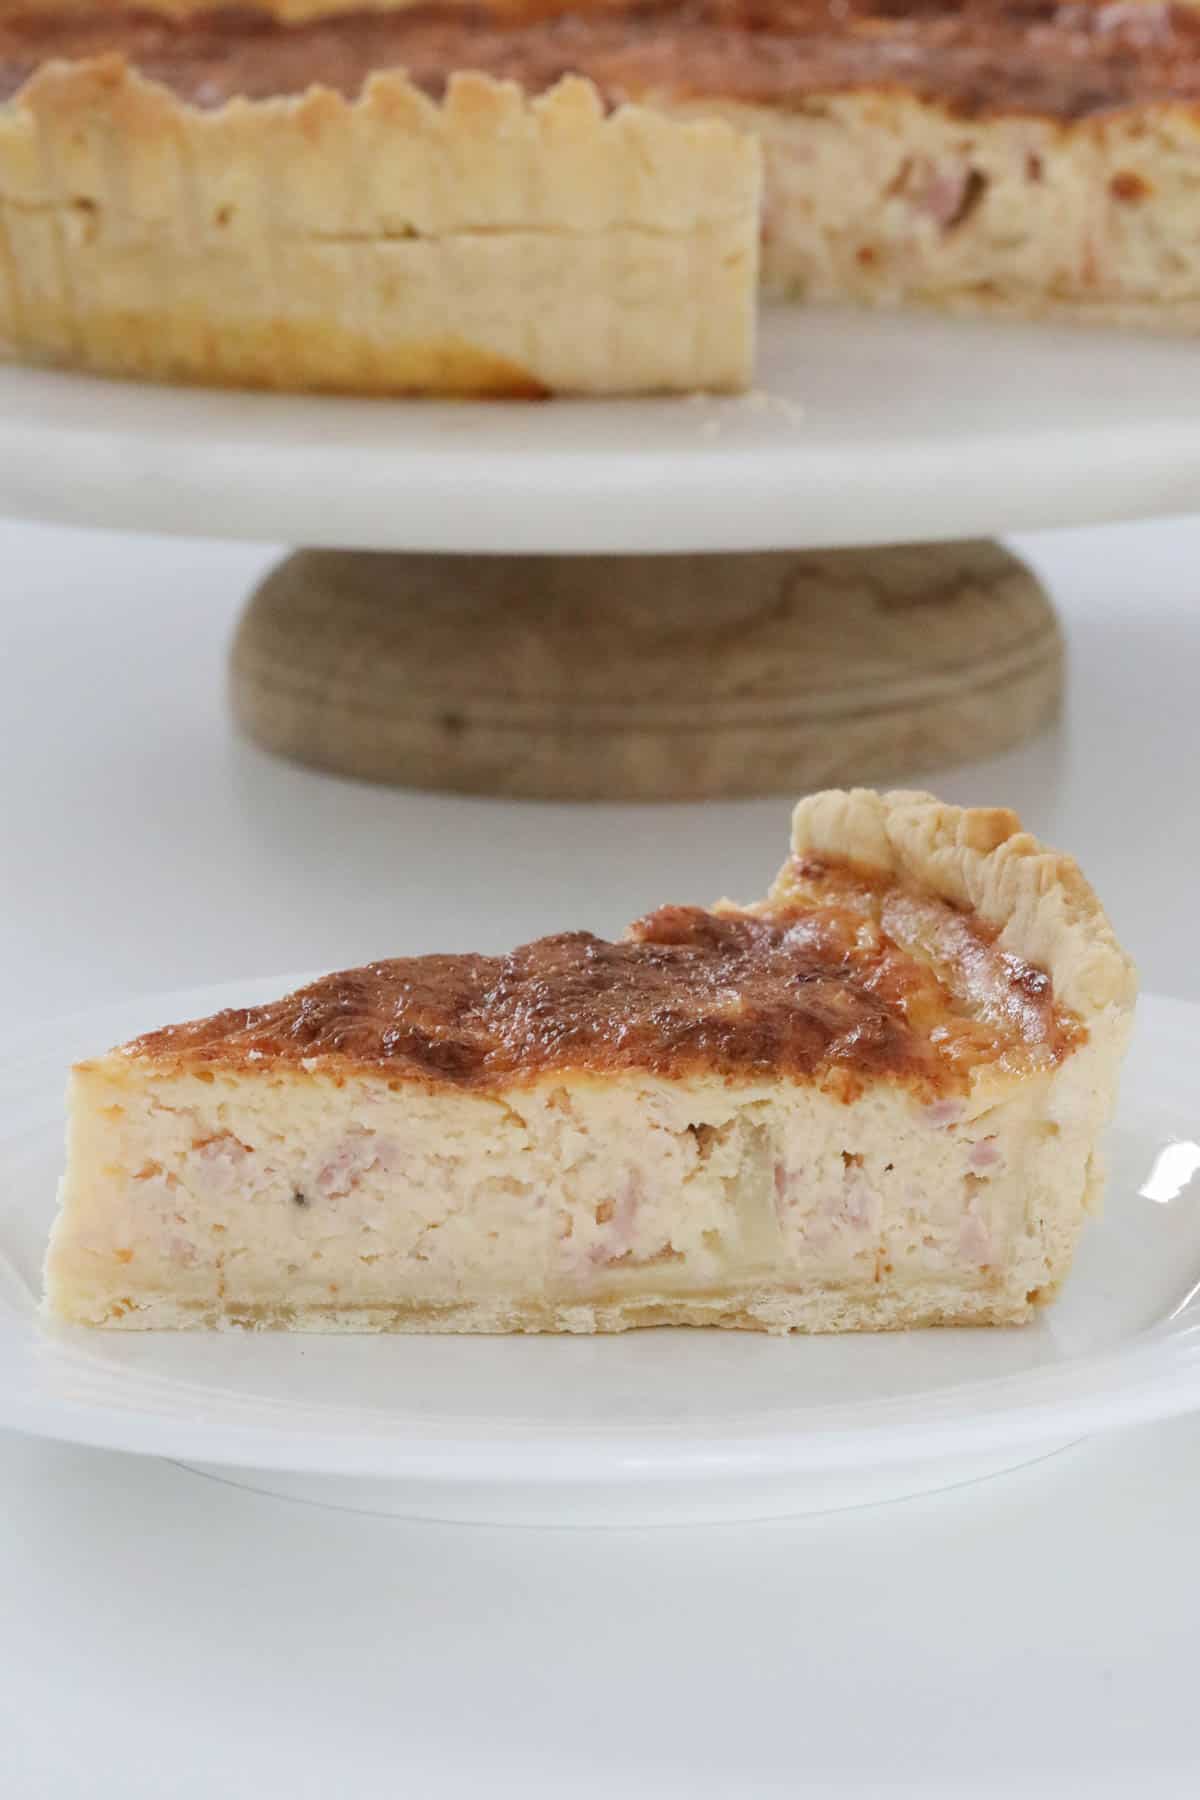 A serve of Thermomix quiche lorraine on a plate.